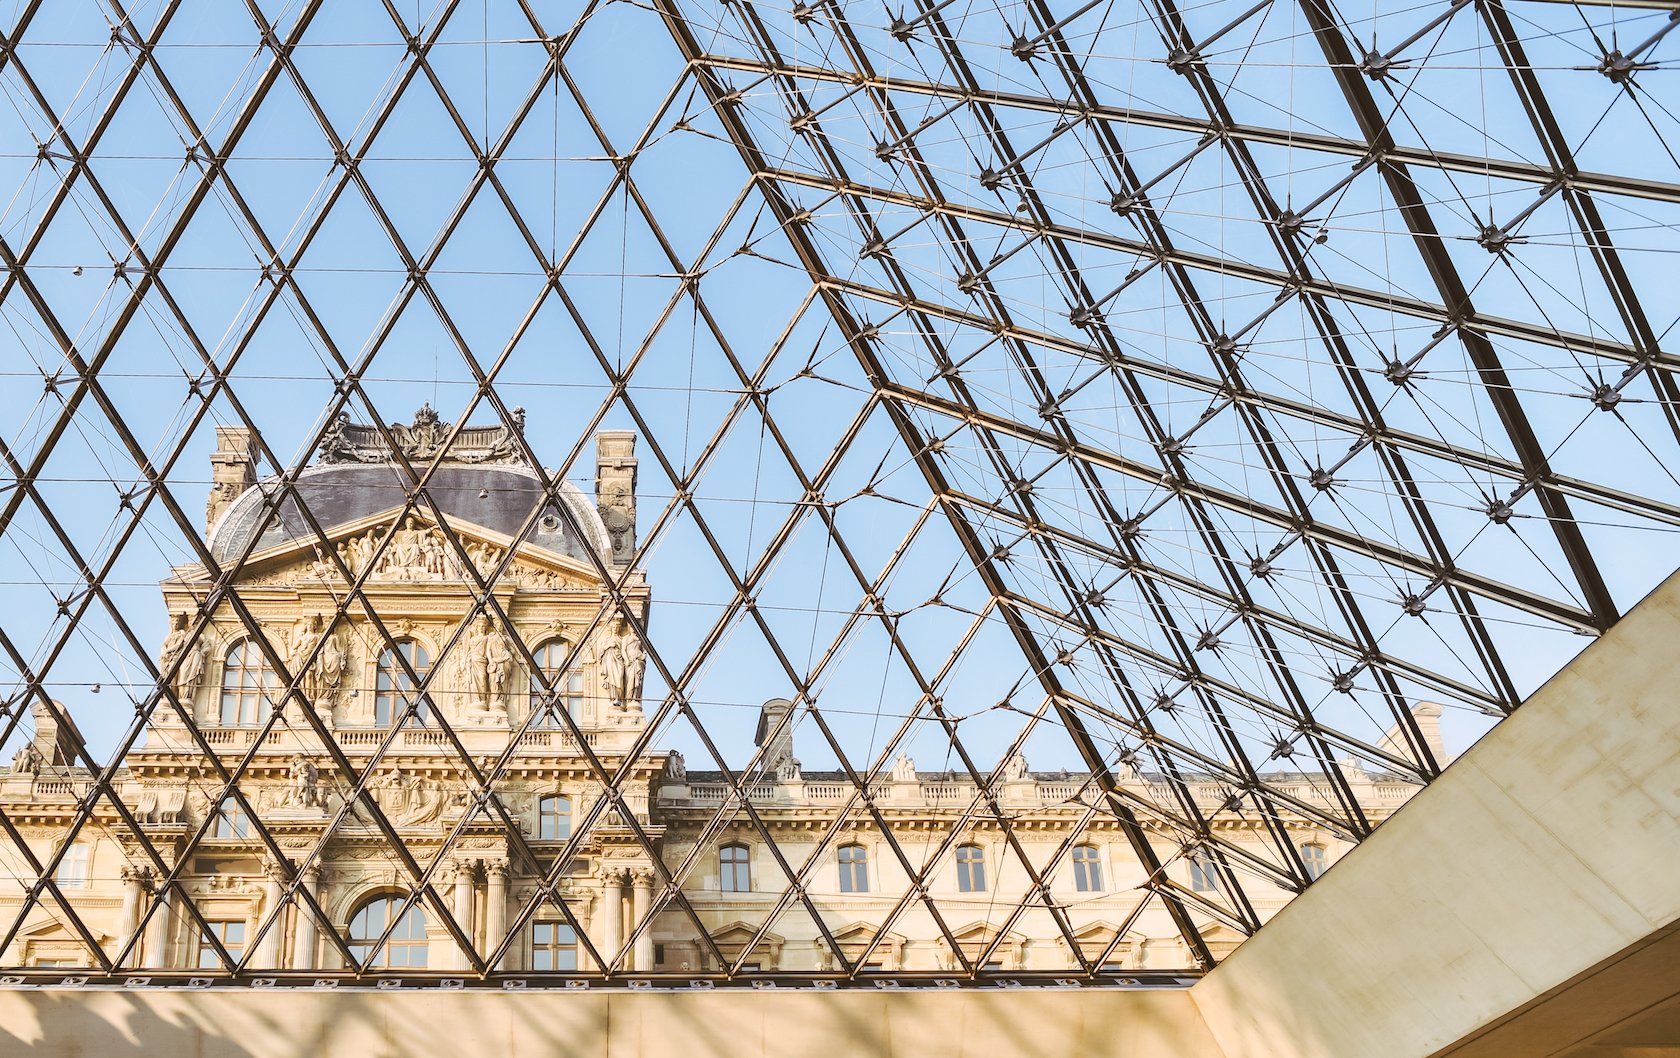 Our Favorite Restaurants Near the Louvre